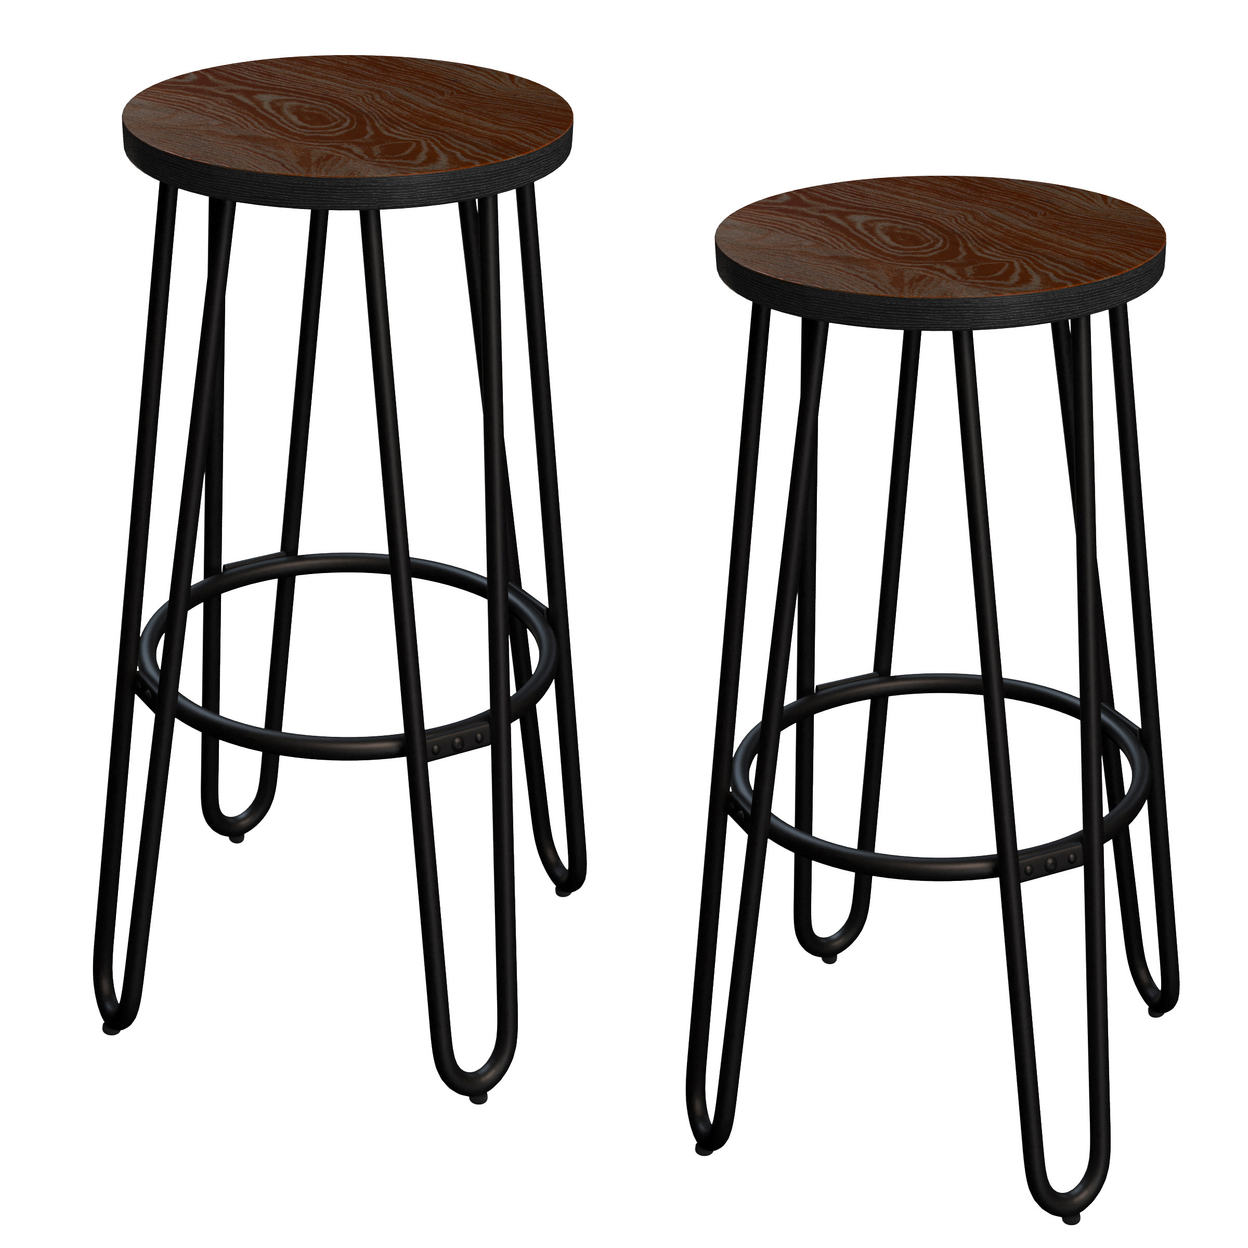 24 Inch Bar Stools Backless Barstools Hairpin Legs Wood Seat 2 Pc